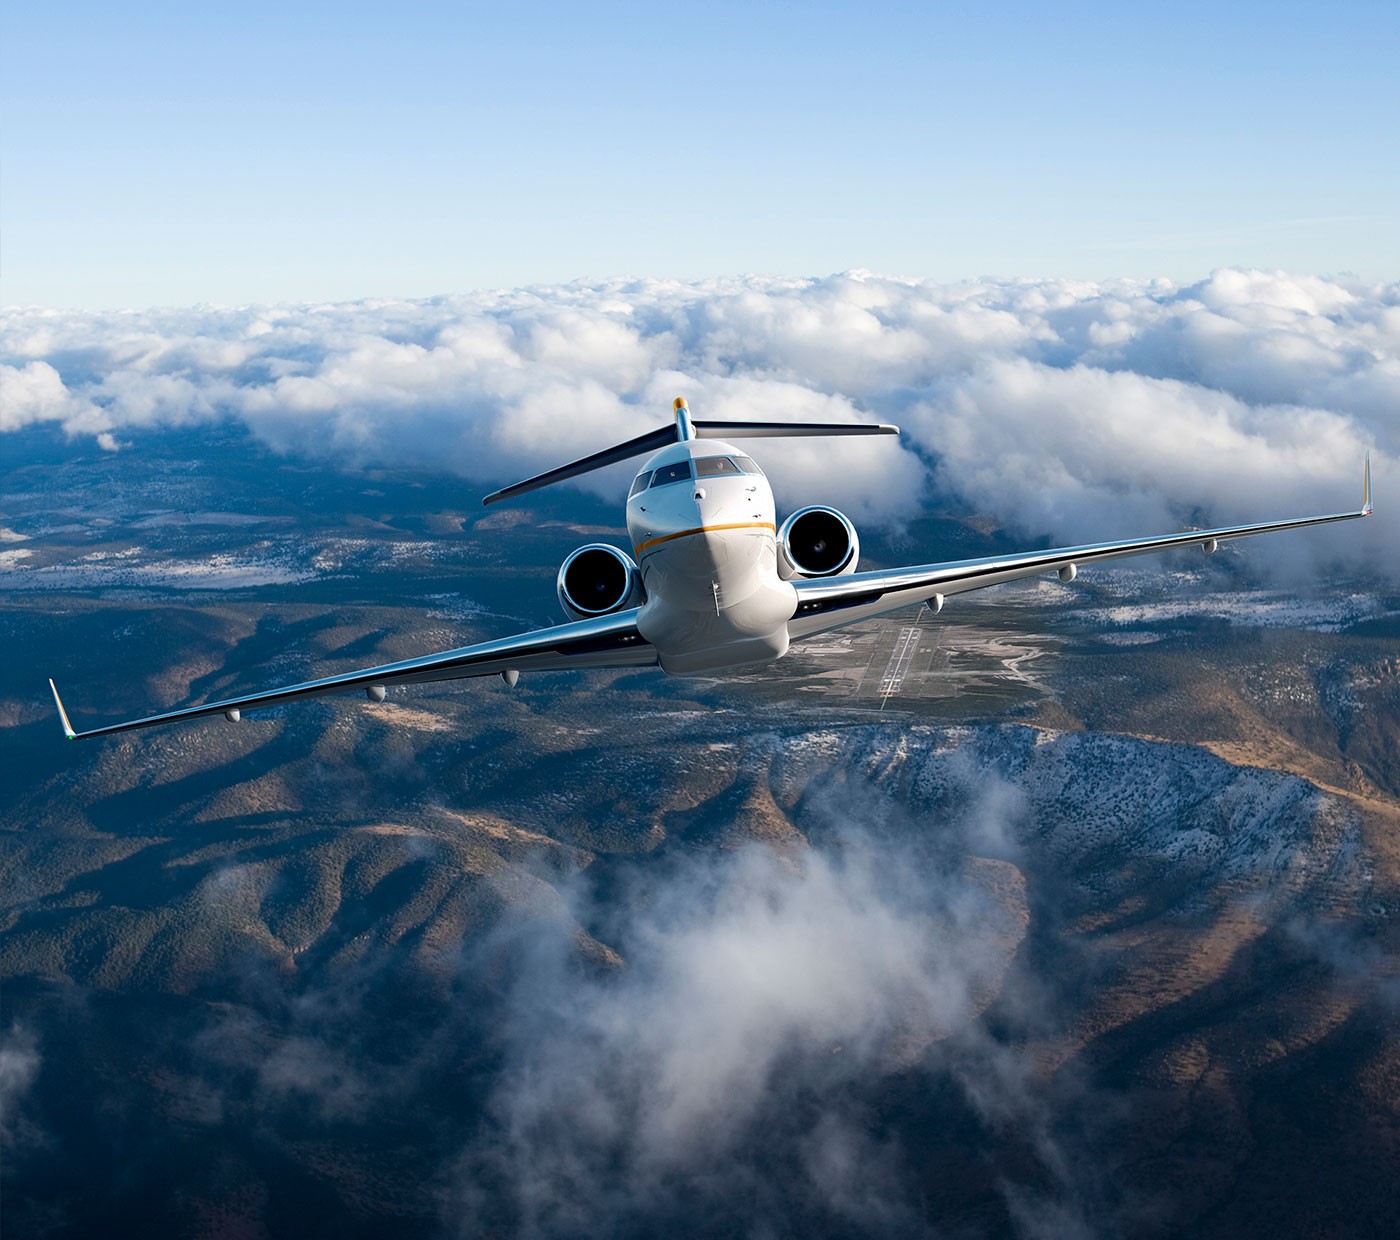 Global 6500 - All-weather performance